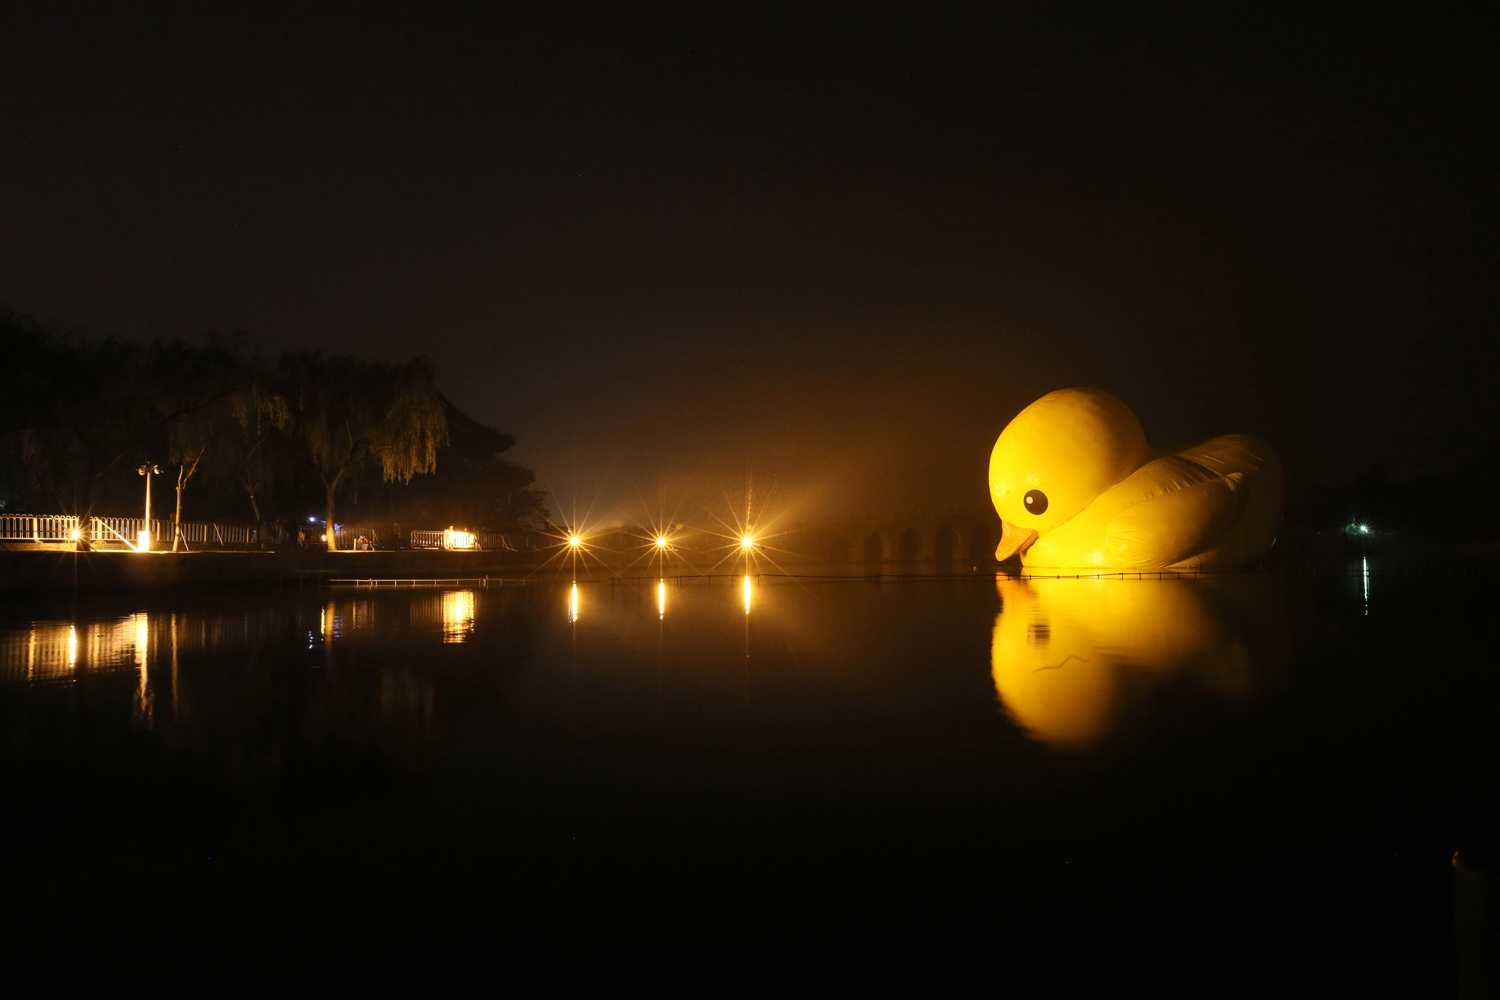 Oct. 27, 2013. A giant, inflatable  Rubber Duck  designed by Dutch conceptual artist Florentijn Hofman is uninstalled at the Summer Palace  in Beijing, China.